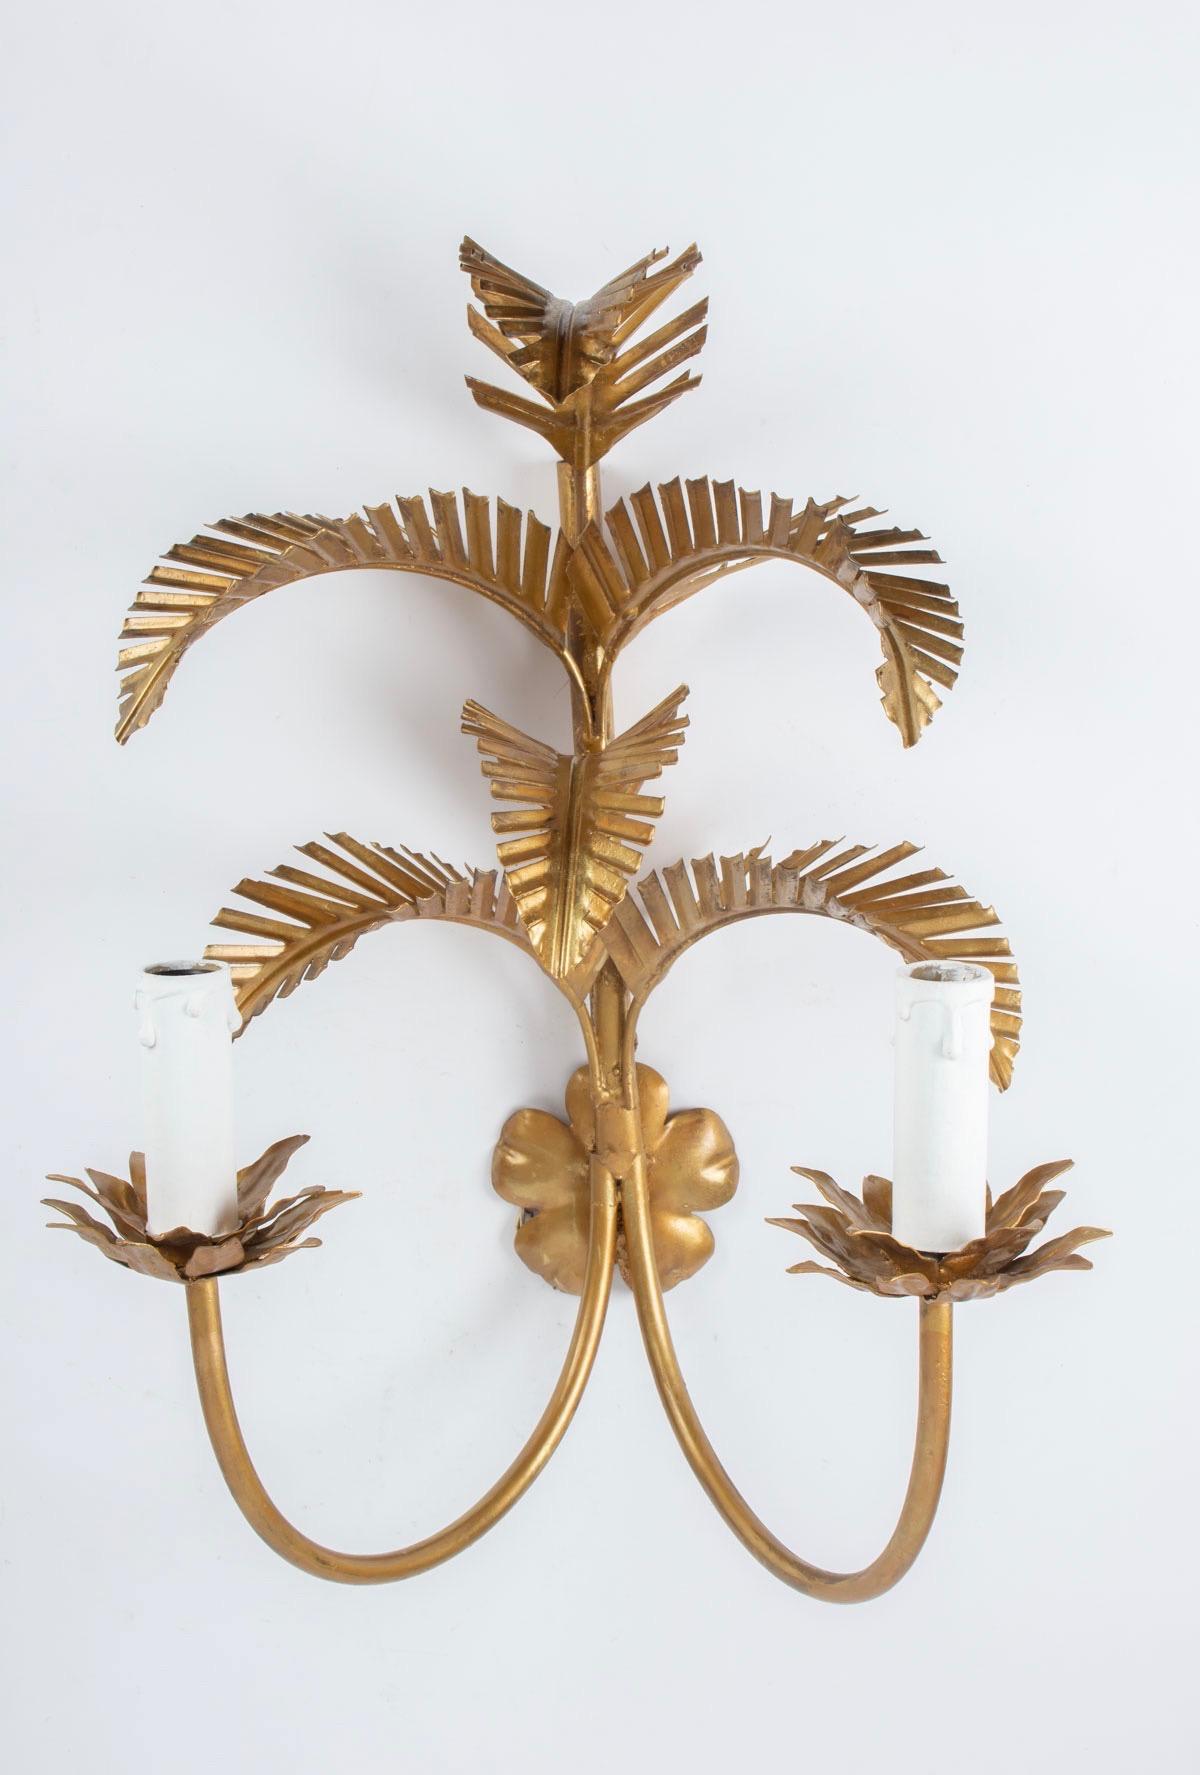 1960s pair of Maison FlorArt gilded palm leaves sconces
Each sconce features six palm leaves and two lighted arms.
The bulb holder figures a stylized flower.
Two bulbs per sconce.